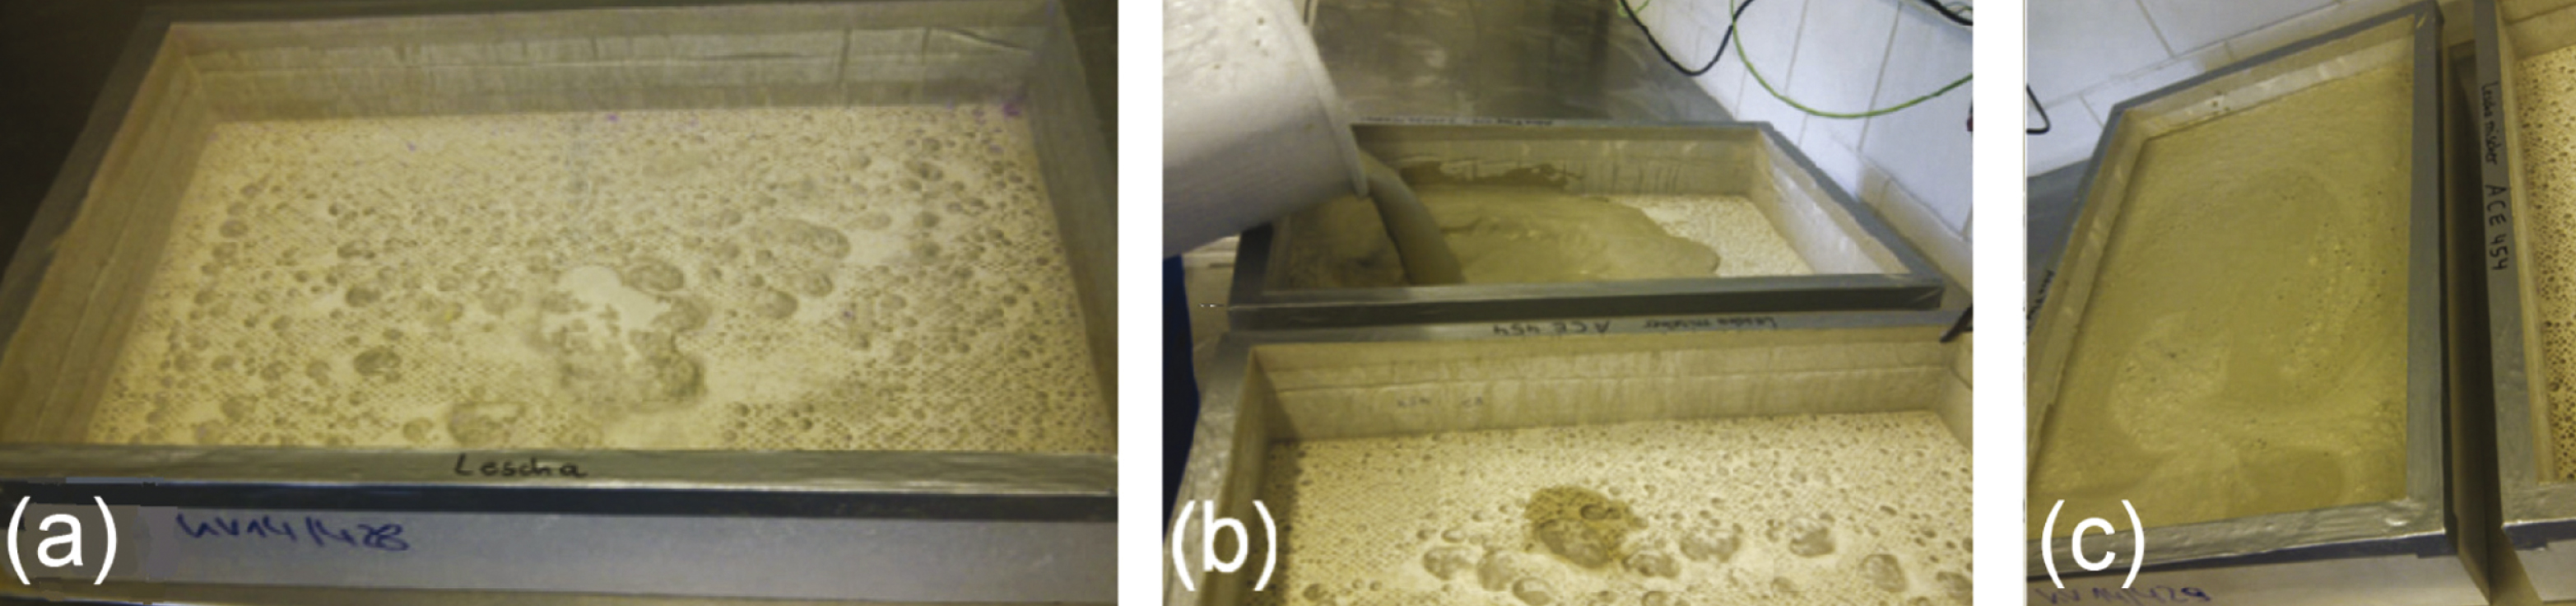 Manufacturing of UHPC-AAC small-scale samples. (a) Empty UHPC box with highly porous internal surface. (b) Cast of AAC slurry. (c) Swelling process of the AAC slurry driven by the aluminum reaction.